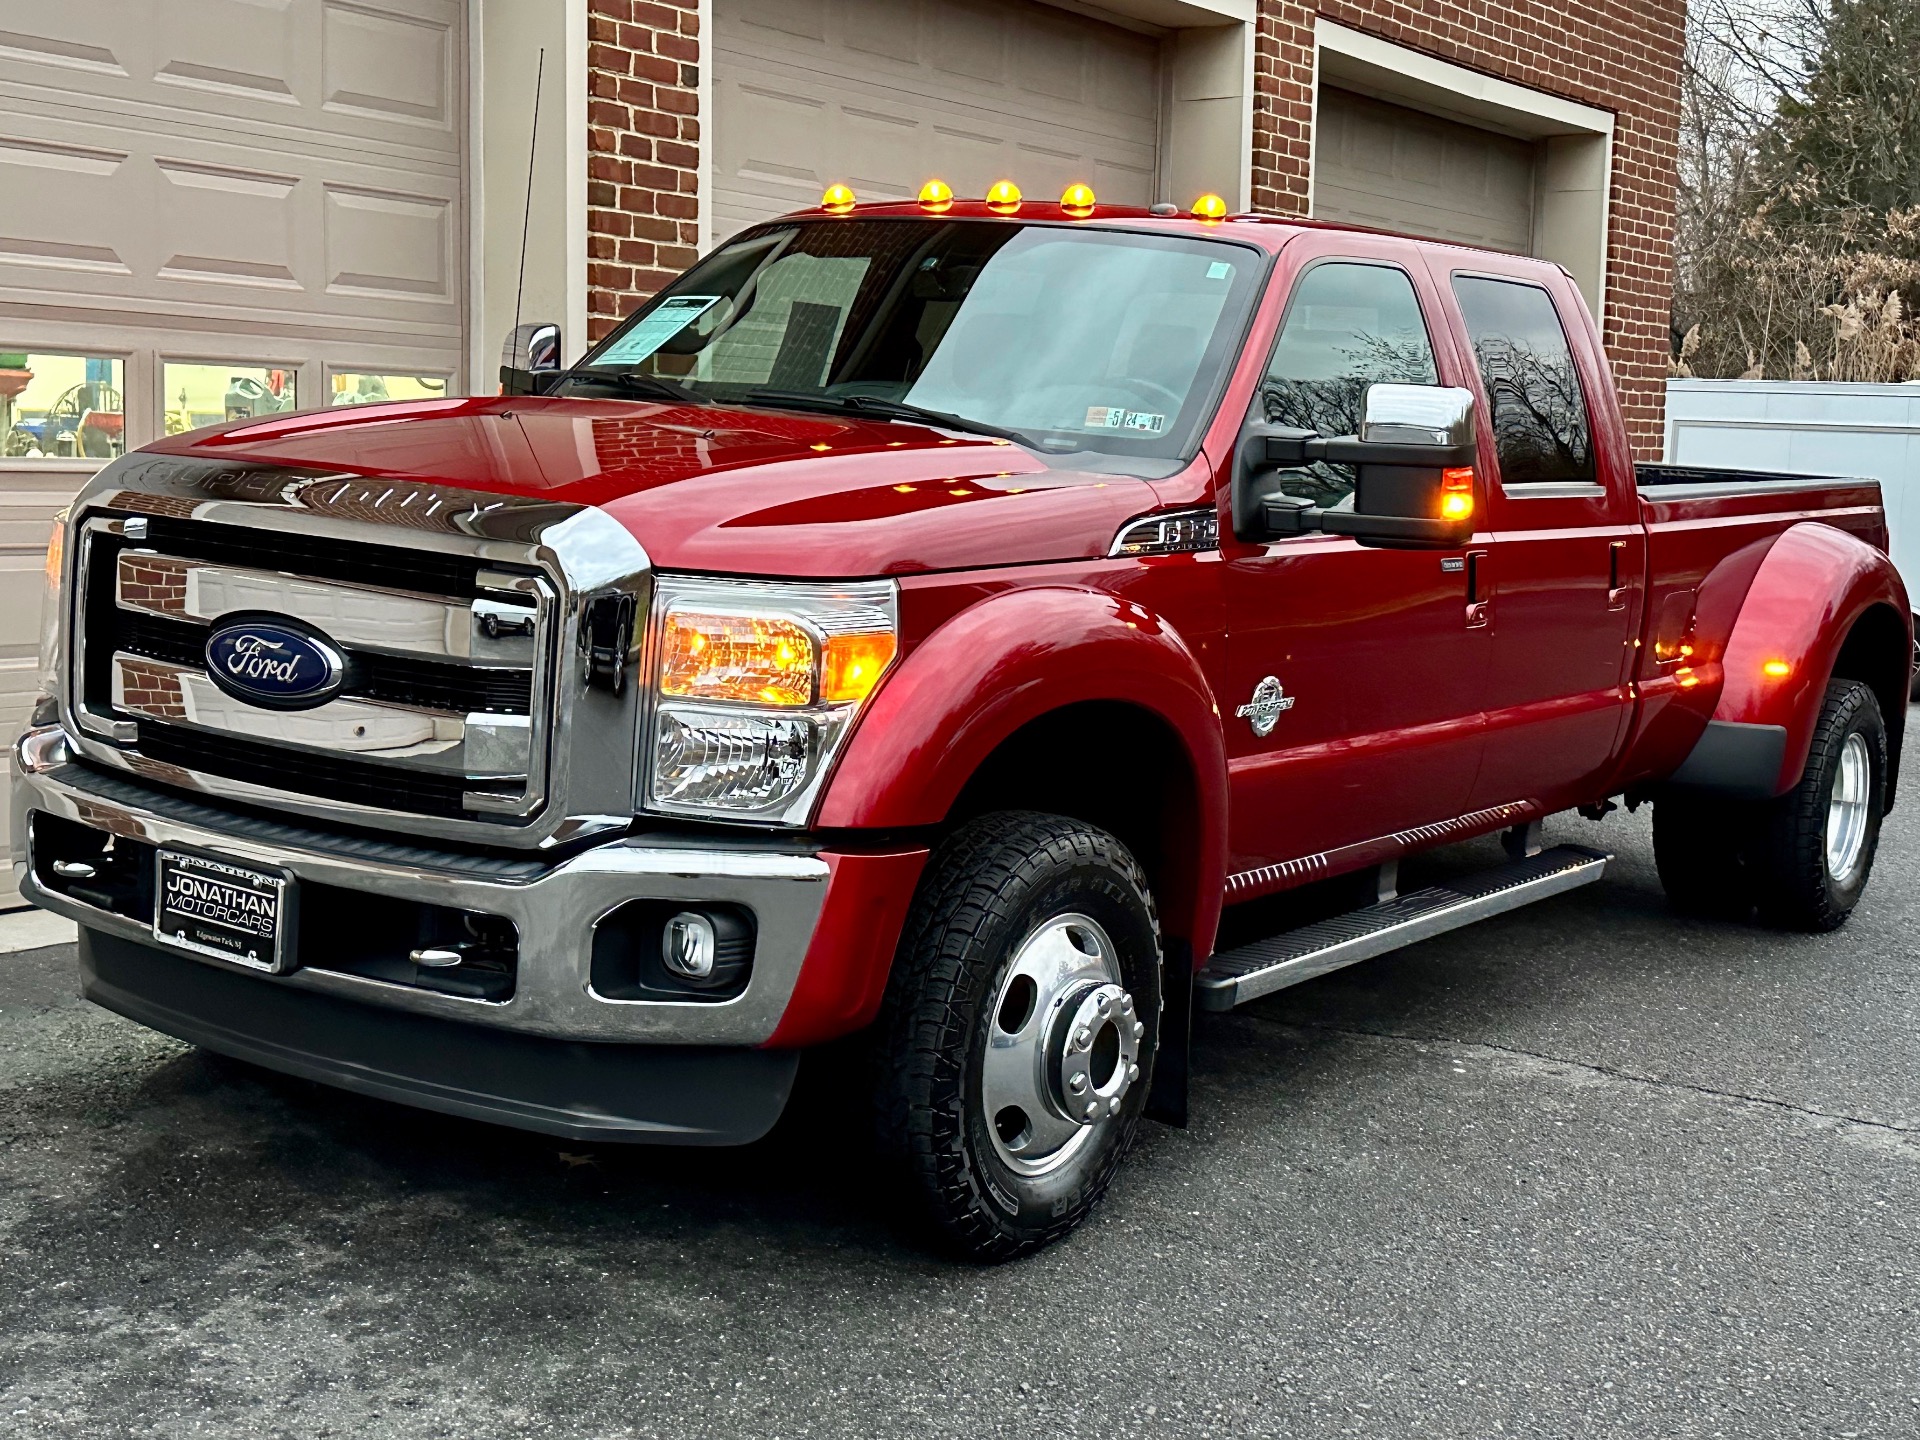 Used-2016-Ford-F-350-Super-Duty-Lariat-DRW